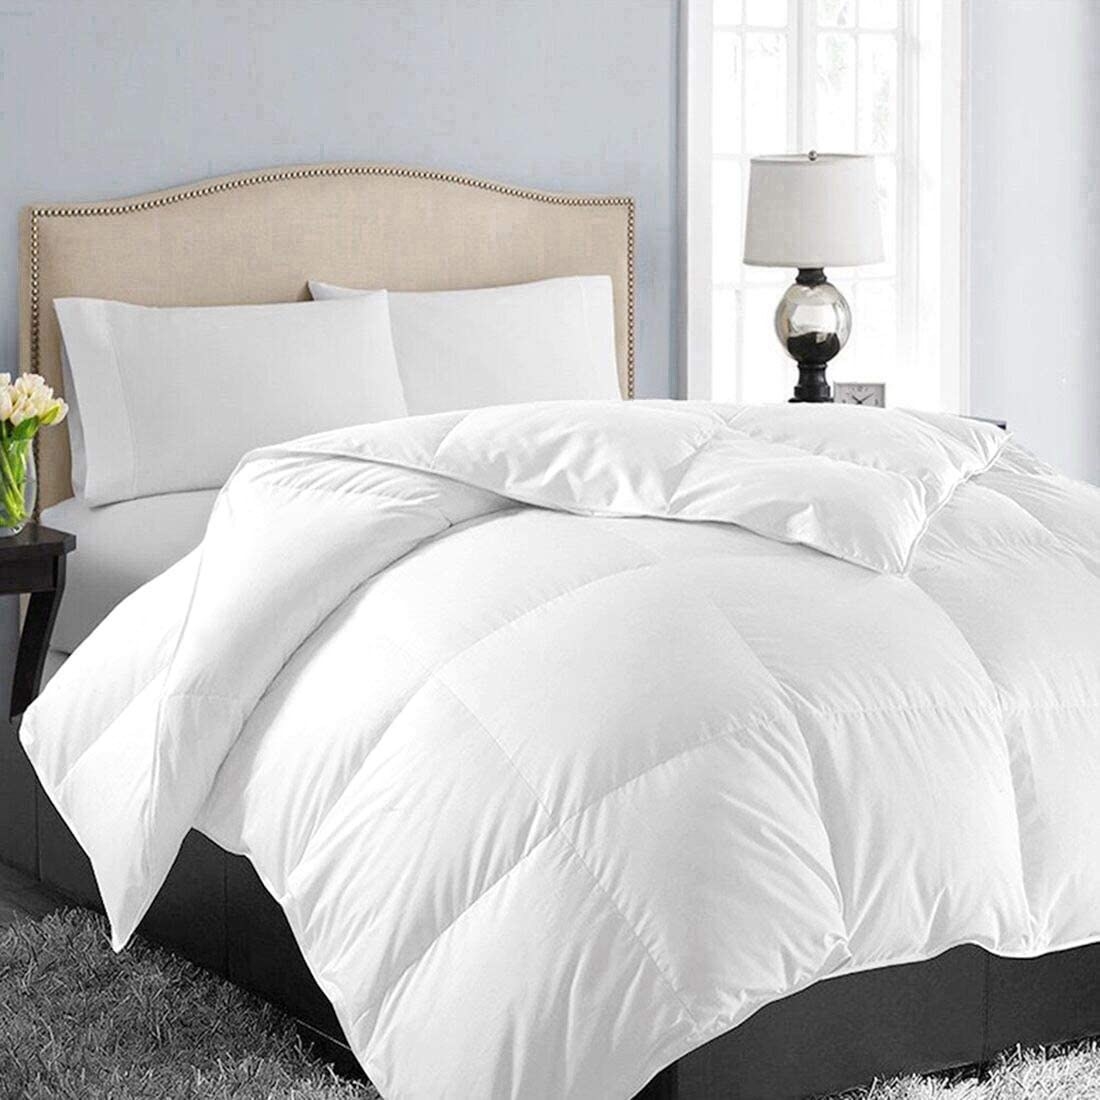 A fluffy duvet on a be with pillows